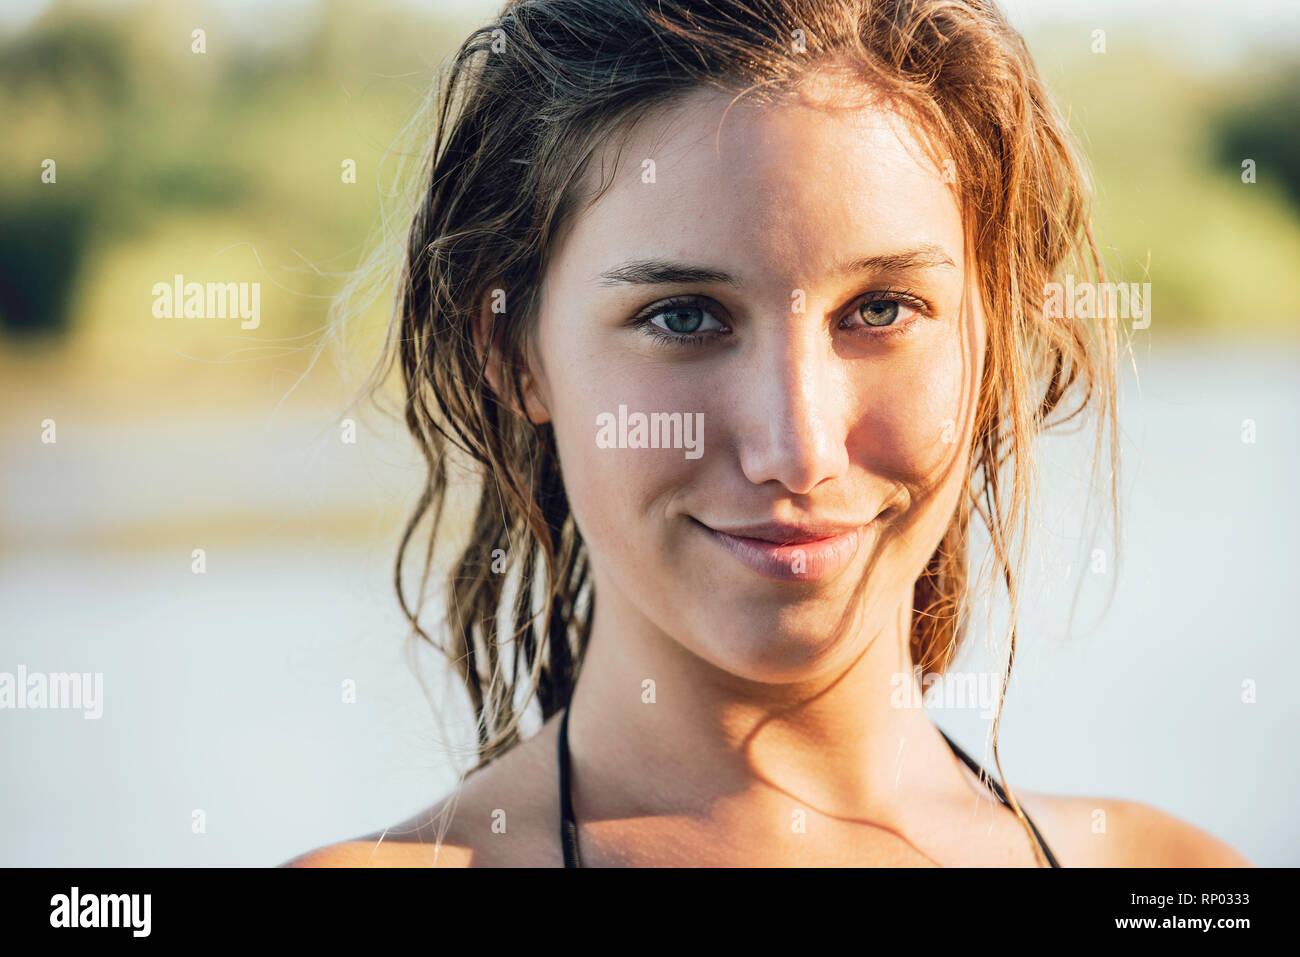 Portrait of young woman standing outdoors Stock Photo